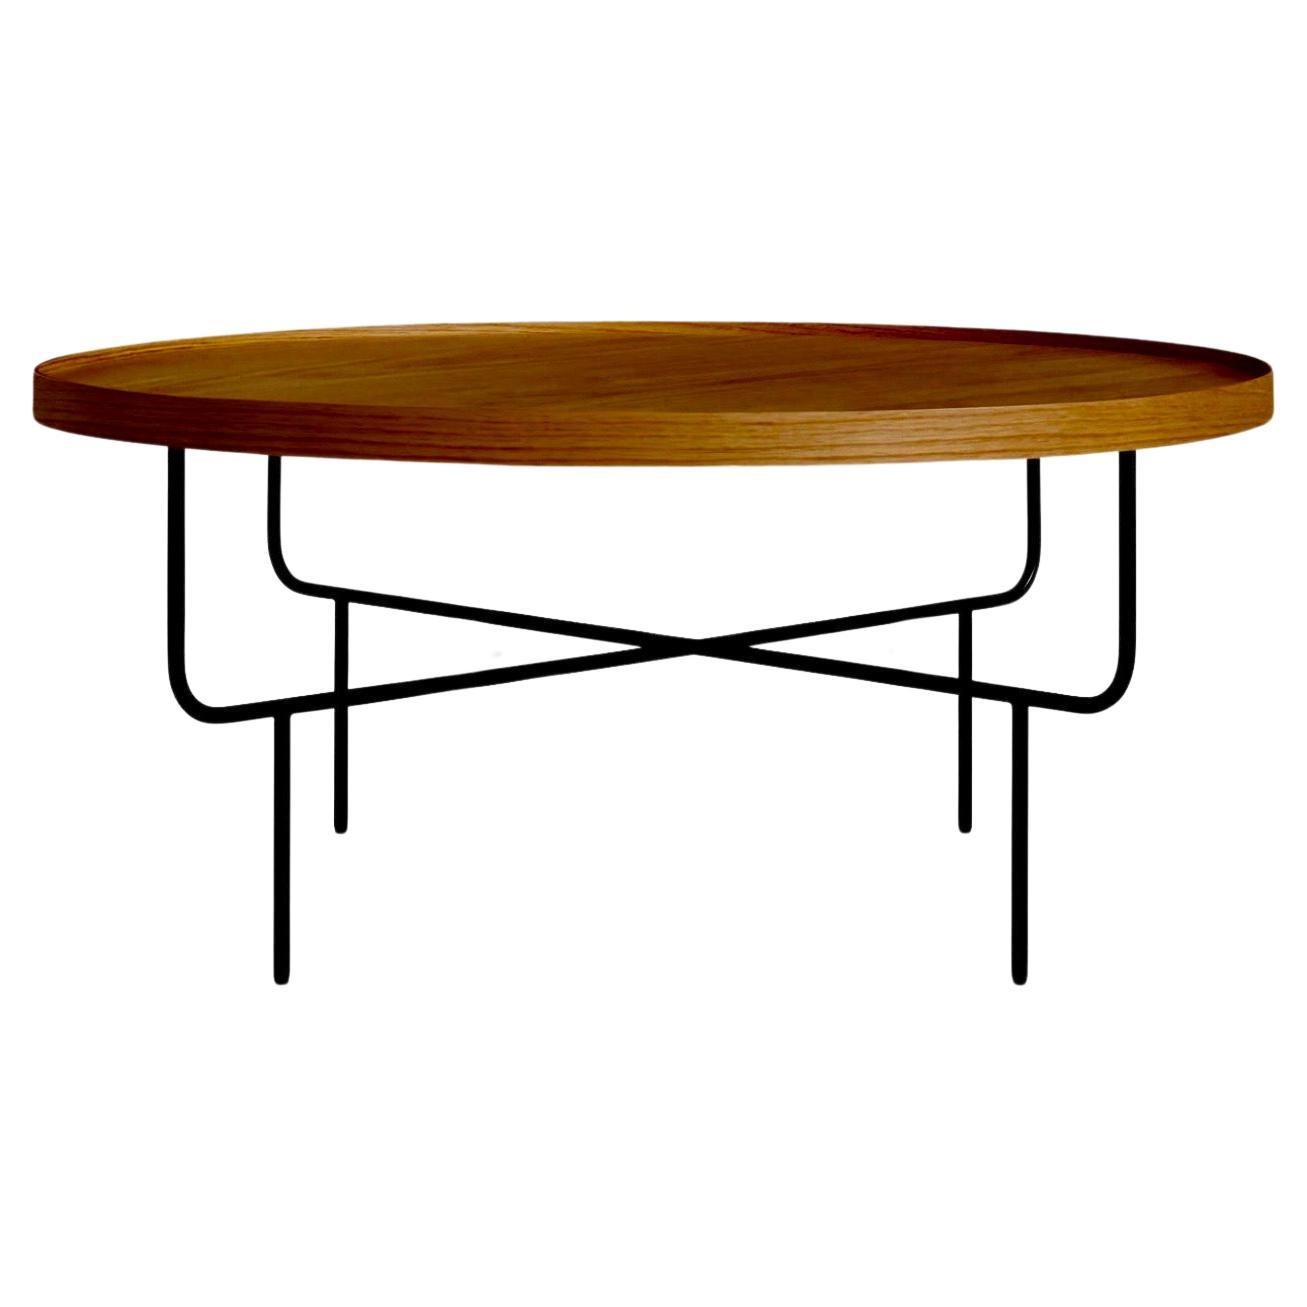 American Mid Century Round Coffee Table in Iron Base with Oak Top Finish For Sale